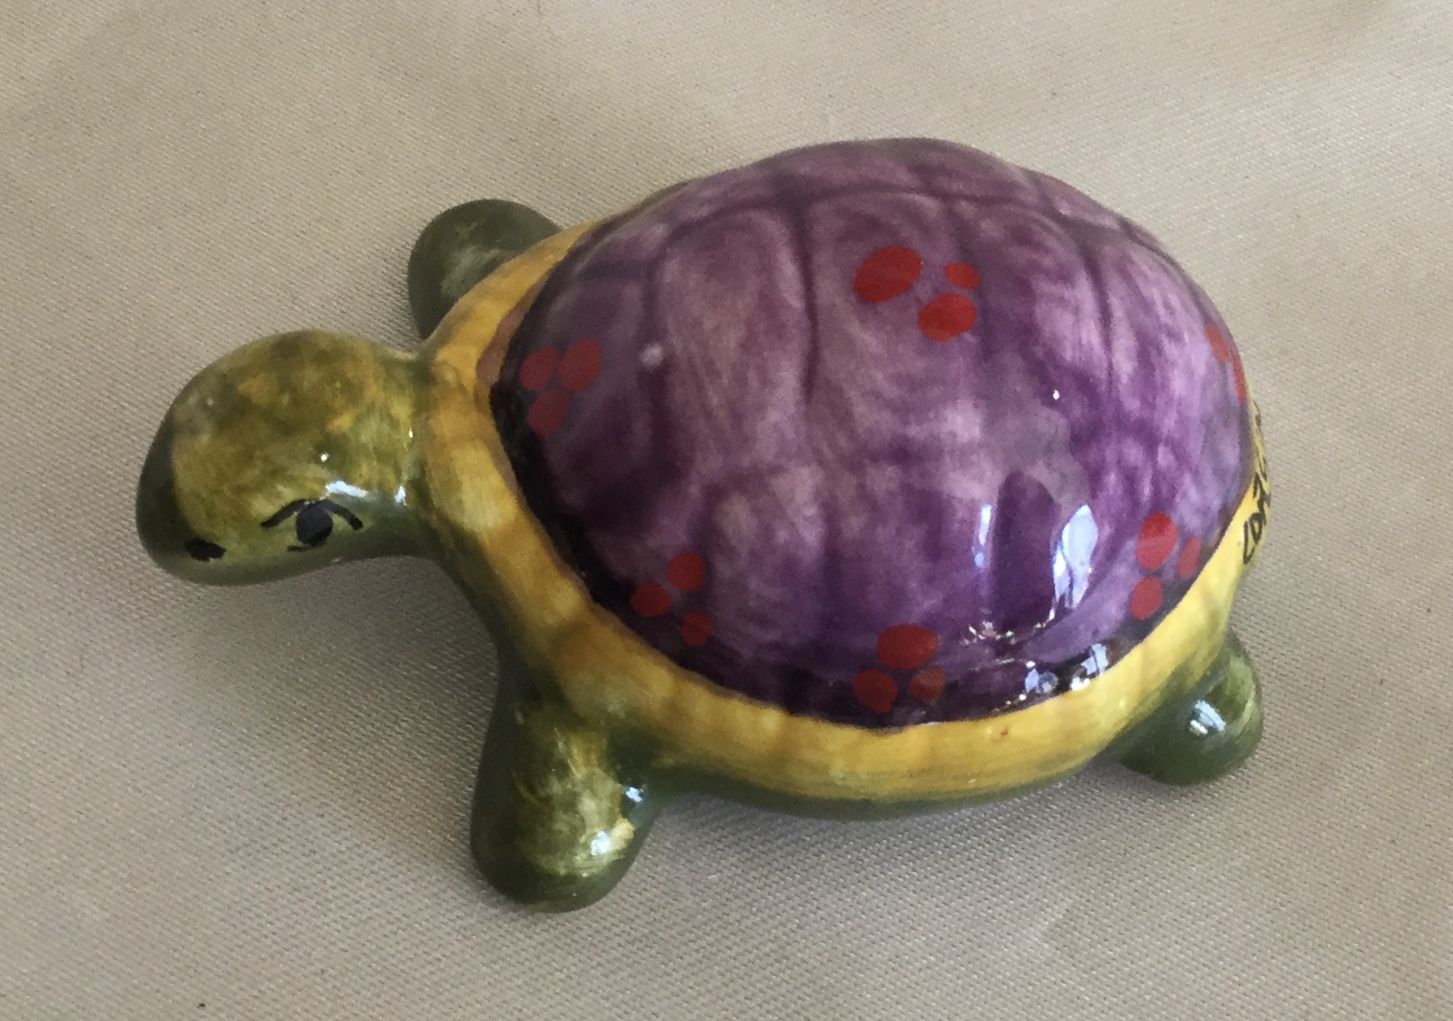 Small turtle 6x4 (1)